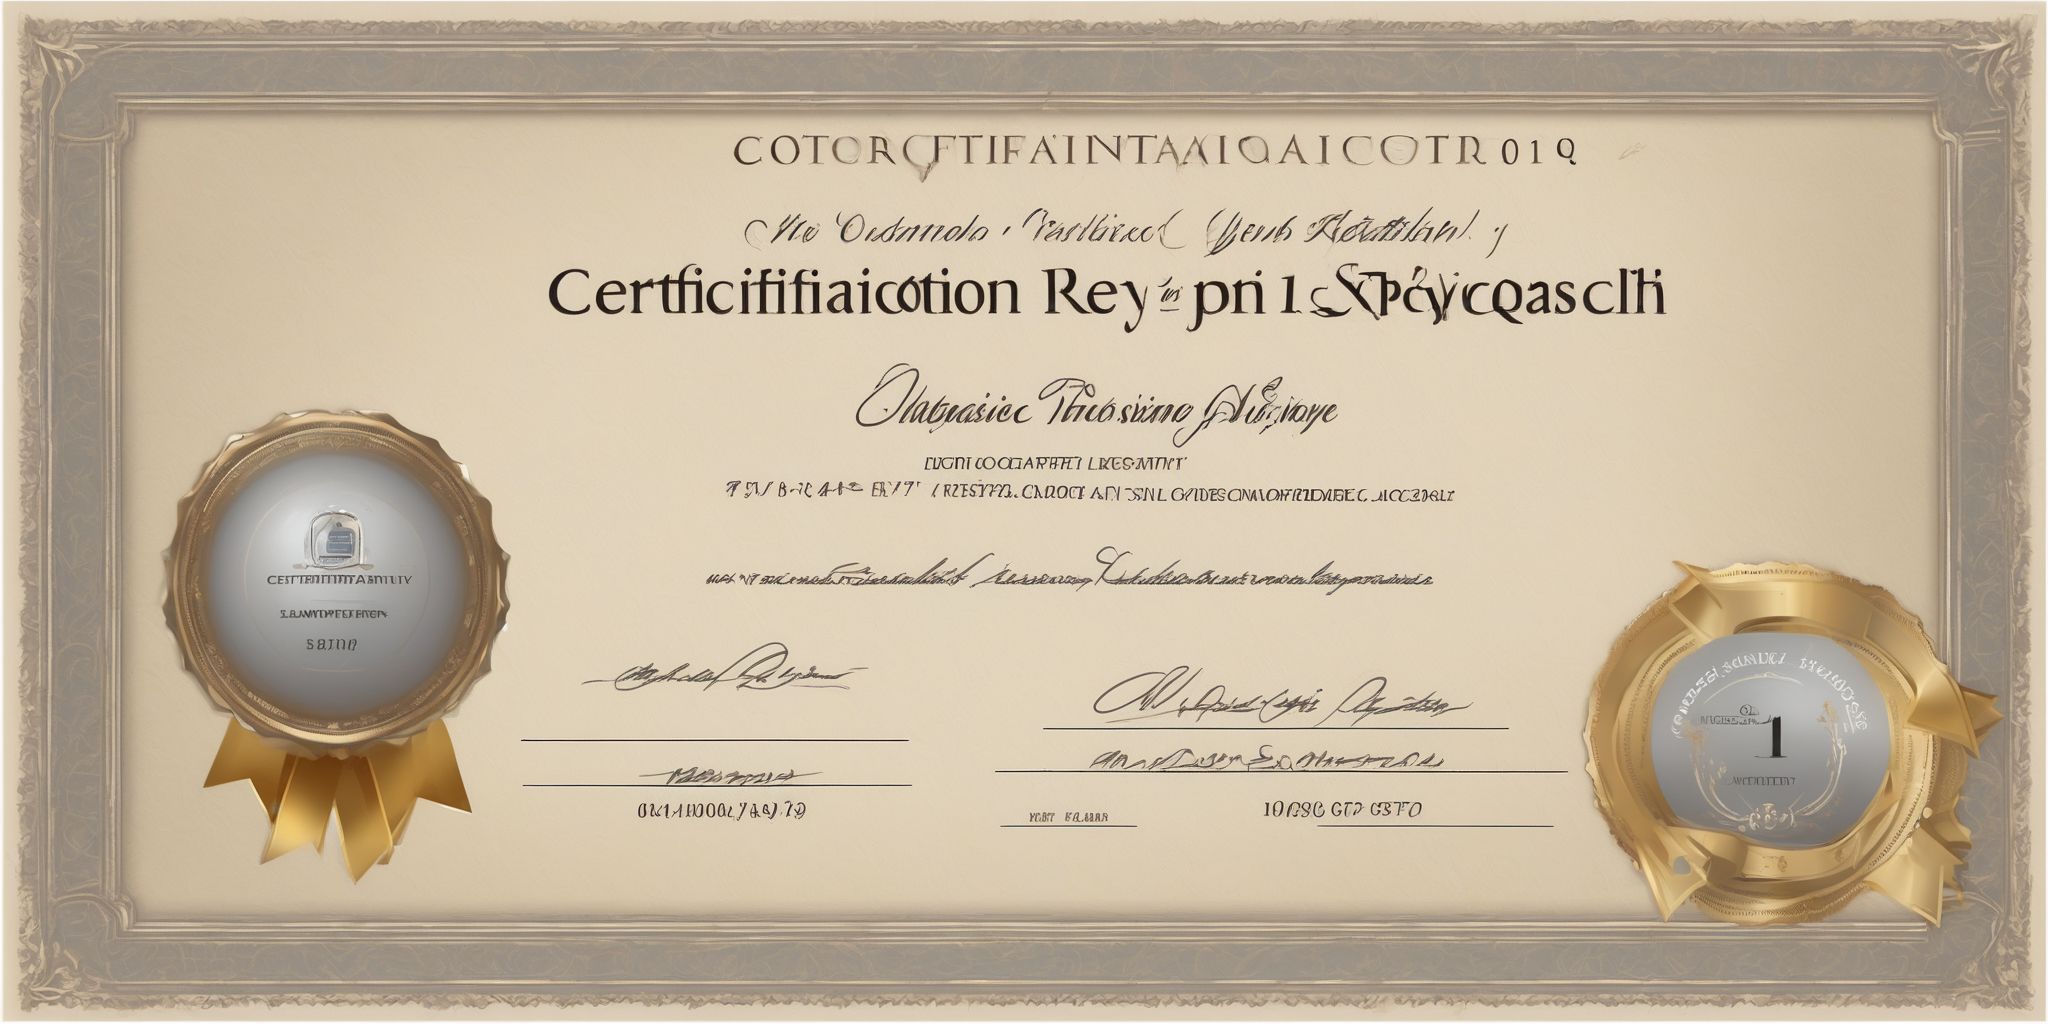 Certification key  in realistic, photographic style